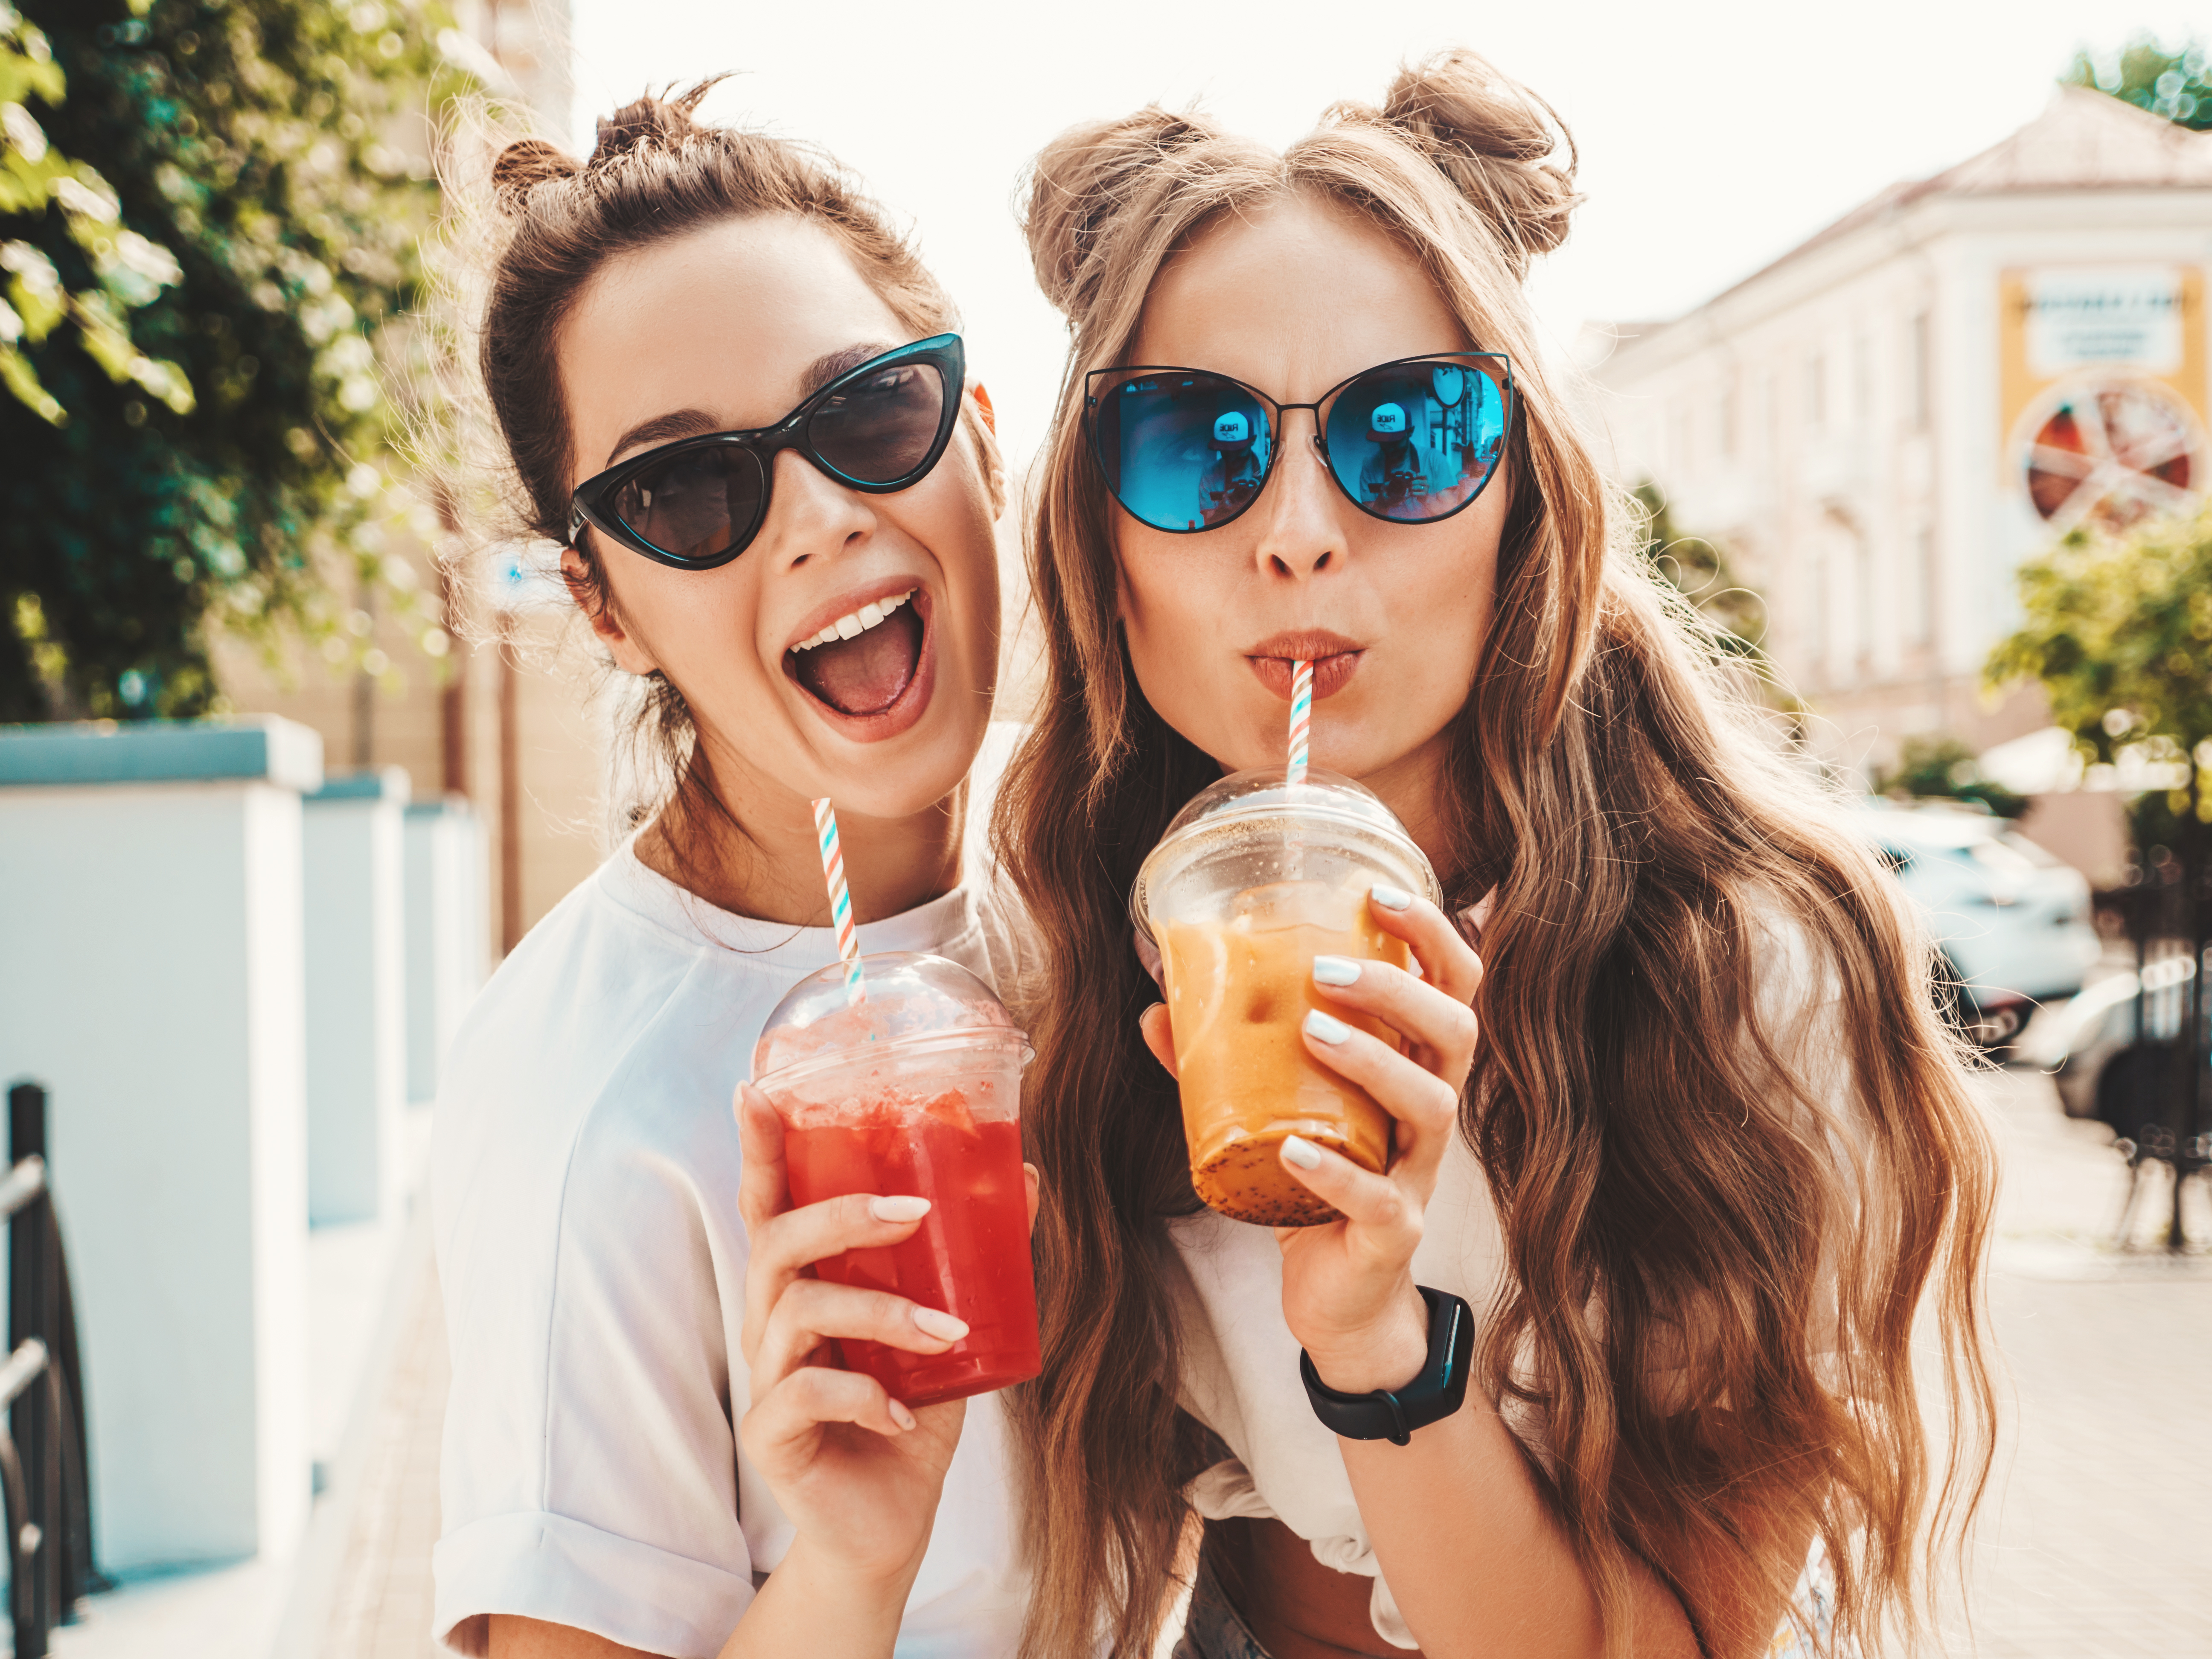 Two friends enjoying smoothies | Source: Shutterstock